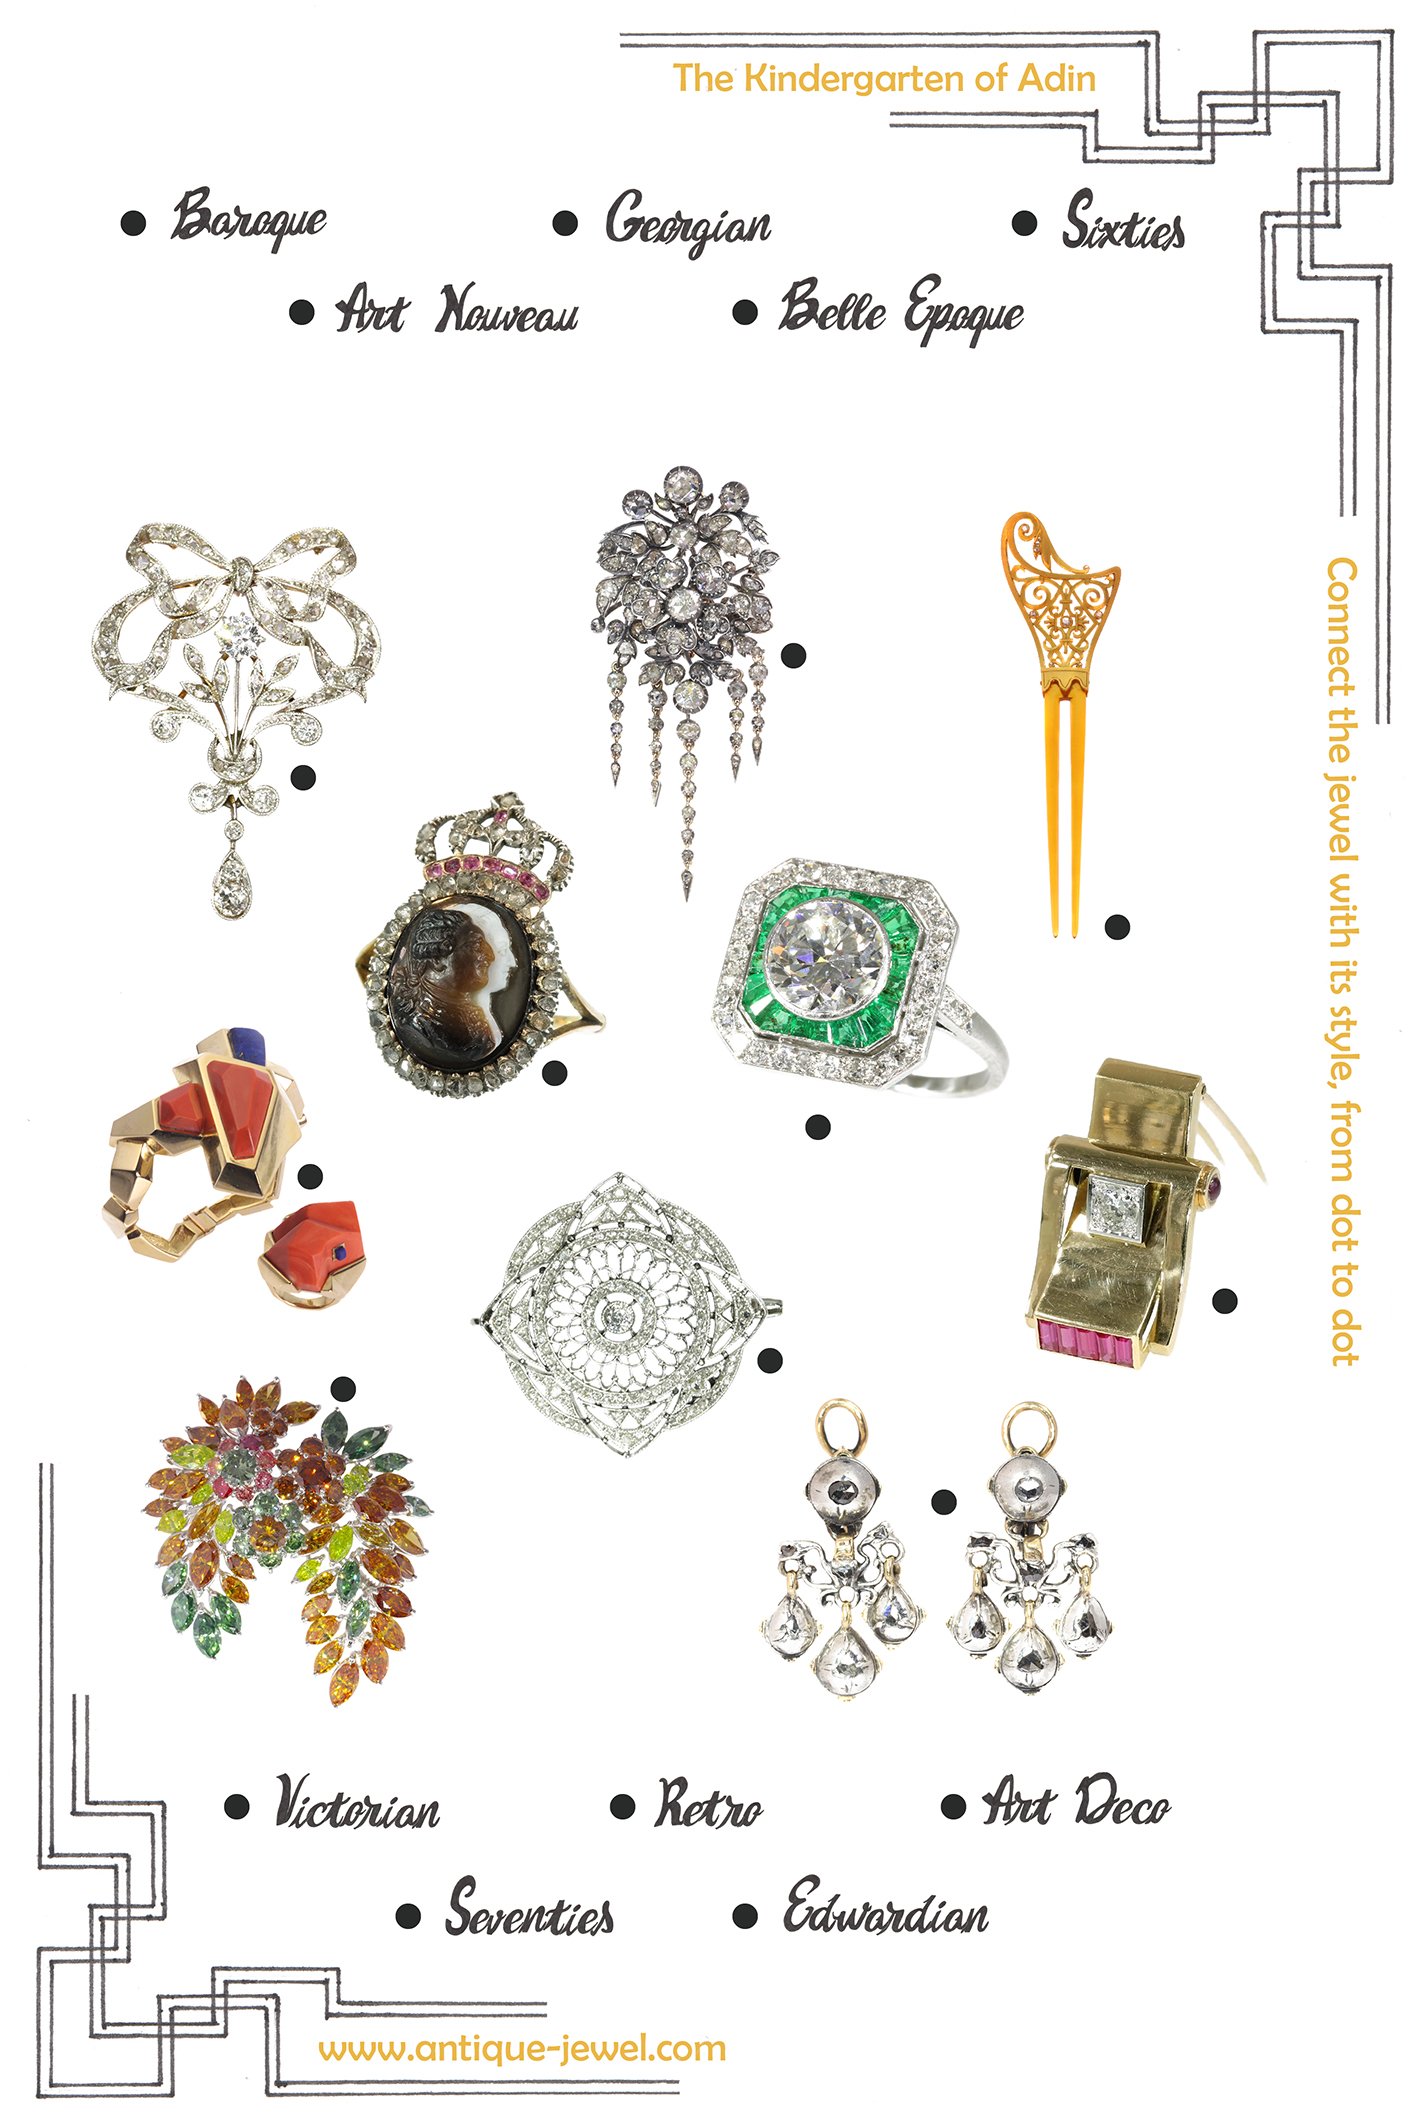 Click picture to check our extensive collection of genuine vintage jewellery